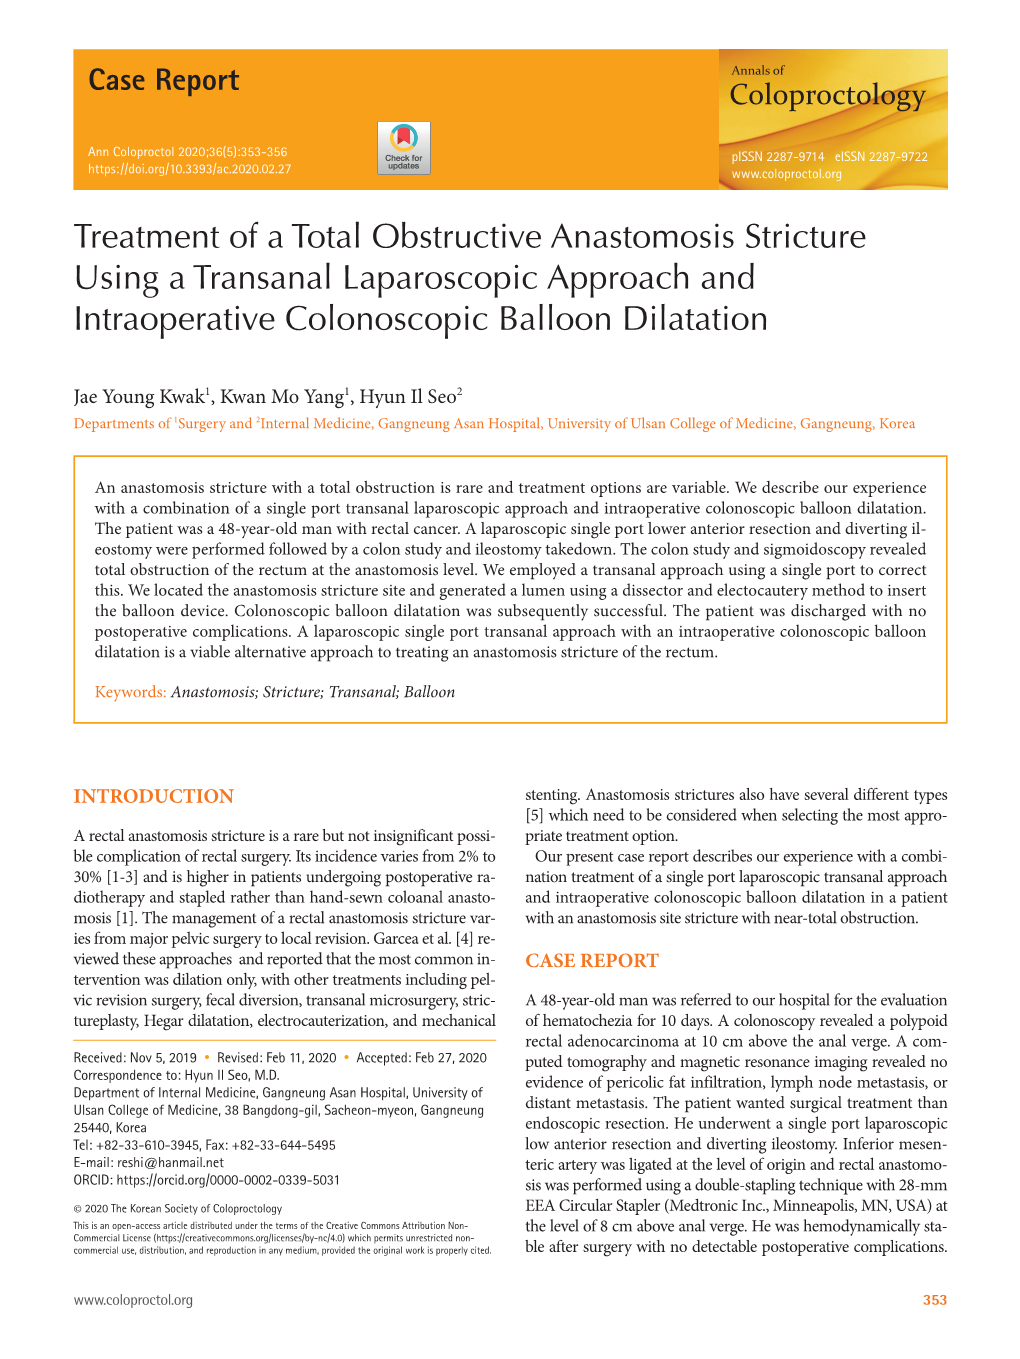 Treatment of a Total Obstructive Anastomosis Stricture Using a Transanal Laparoscopic Approach and Intraoperative Colonoscopic Balloon Dilatation